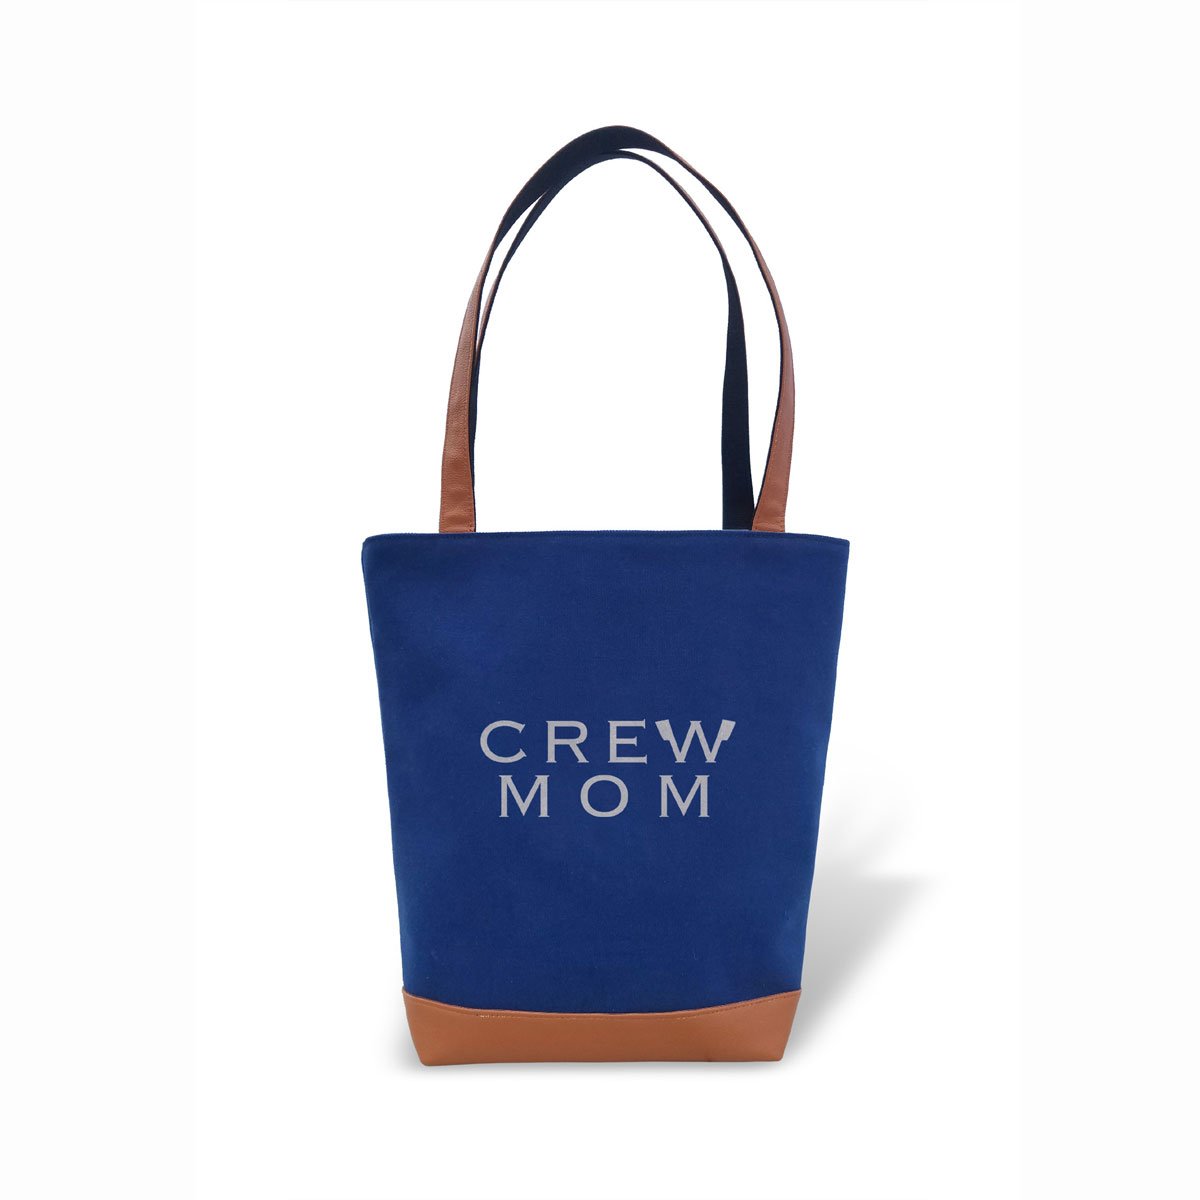 Tote Bag - Crew Mom - Strokeside Designs Rowing jewelry- Rowing Gifts Ideas- Rowing Coach Gifts